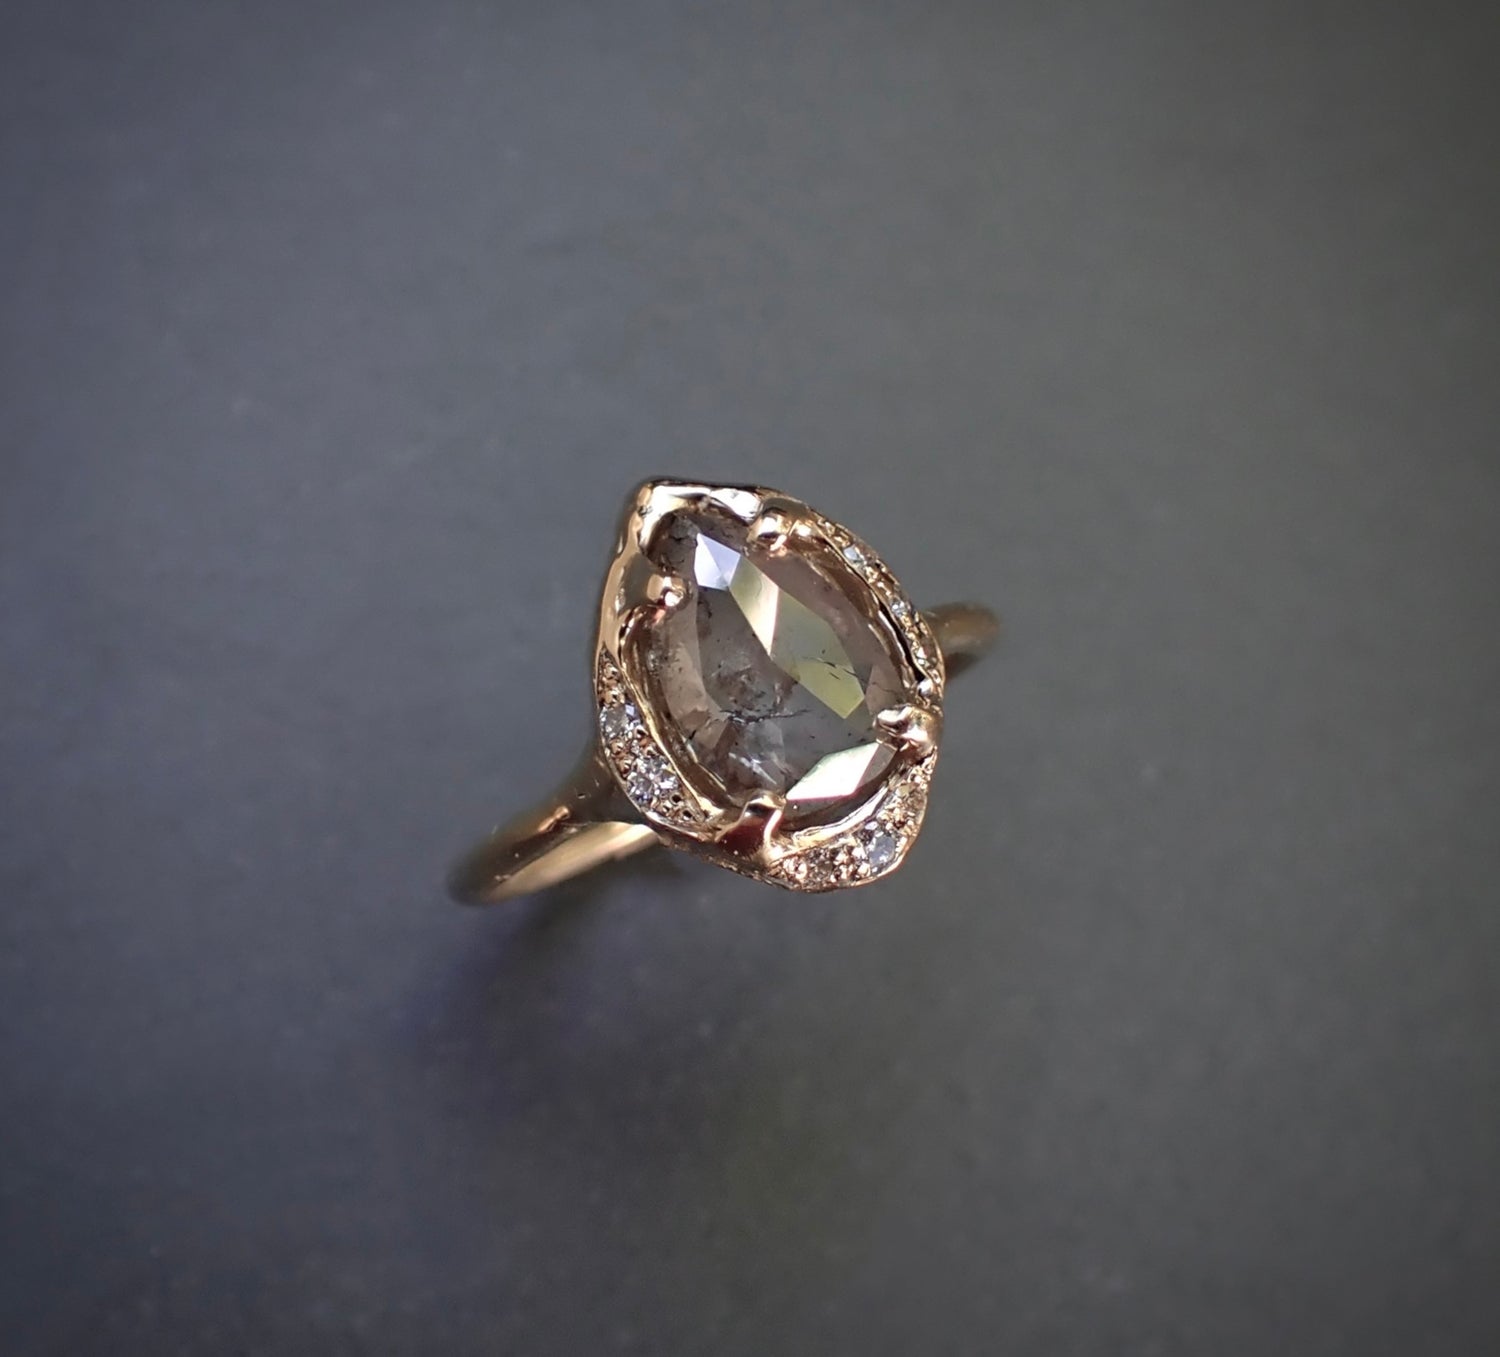 1.72ct Salt and Pepper Pear Diamond Ring in a Scattered Halo Setting - Salt and Pepper Diamond Ring- mossNstone